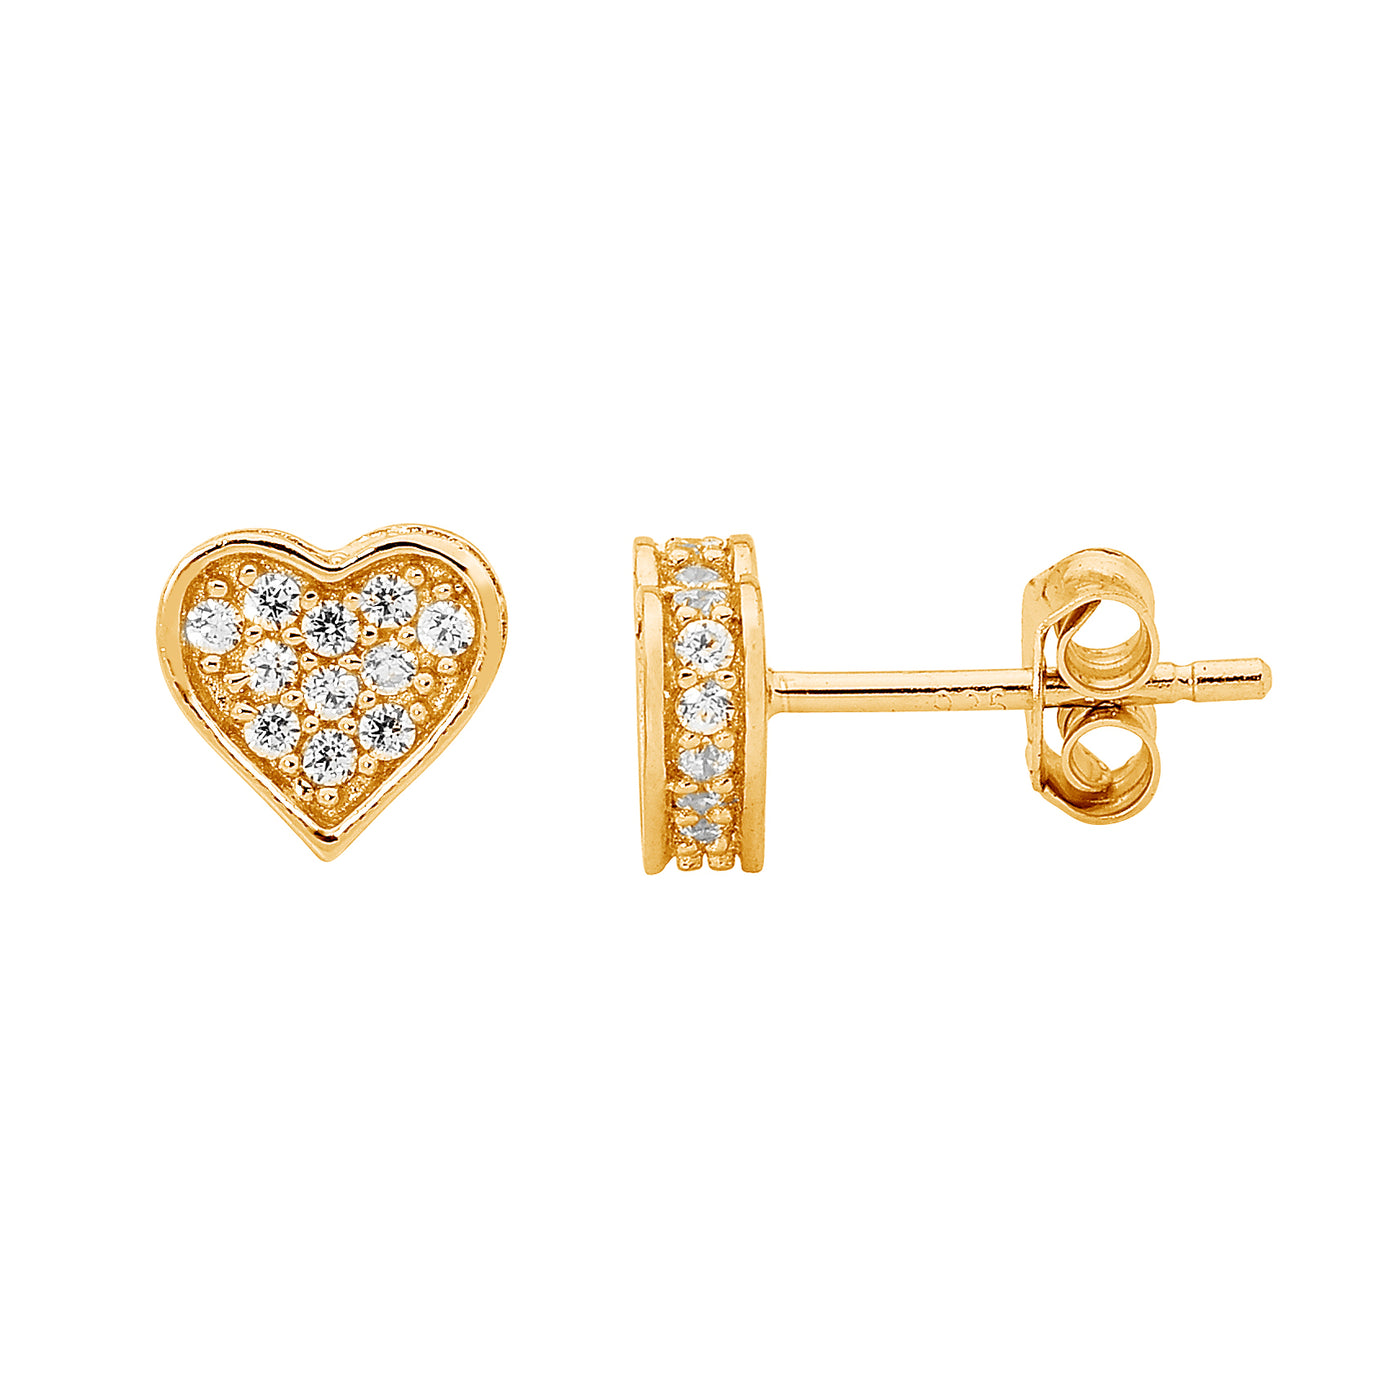 Heart Stud Earrings with 18ct Gold Plating